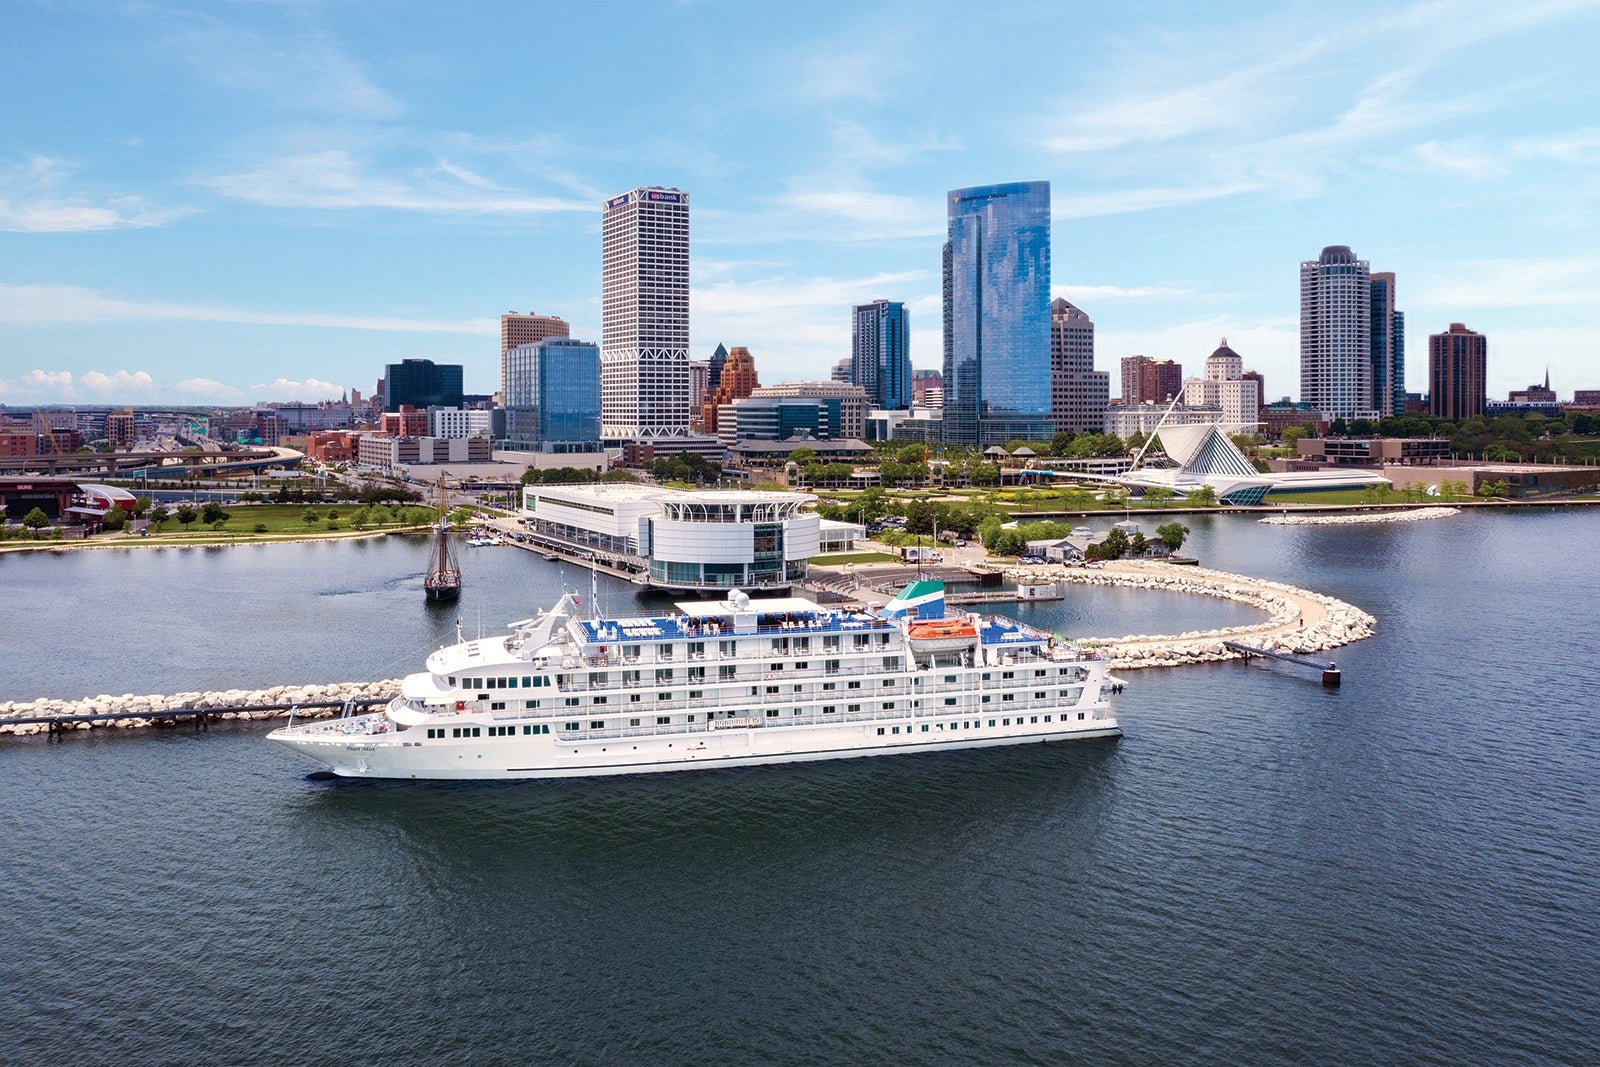 Great Lakes cruise guide: Best itineraries, planning tips and things to do